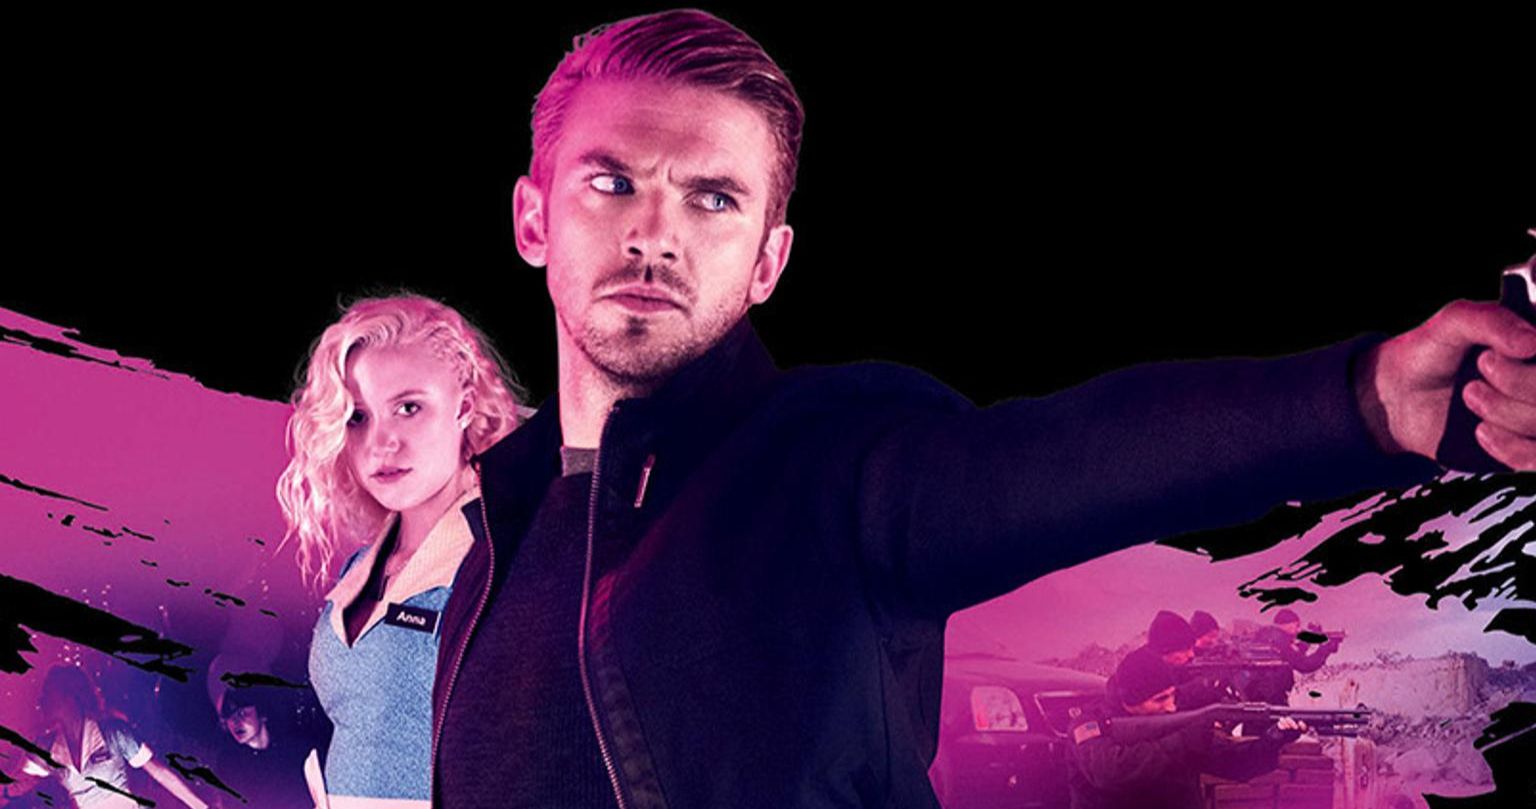 The Guest 2 May Become a Limited Event Series